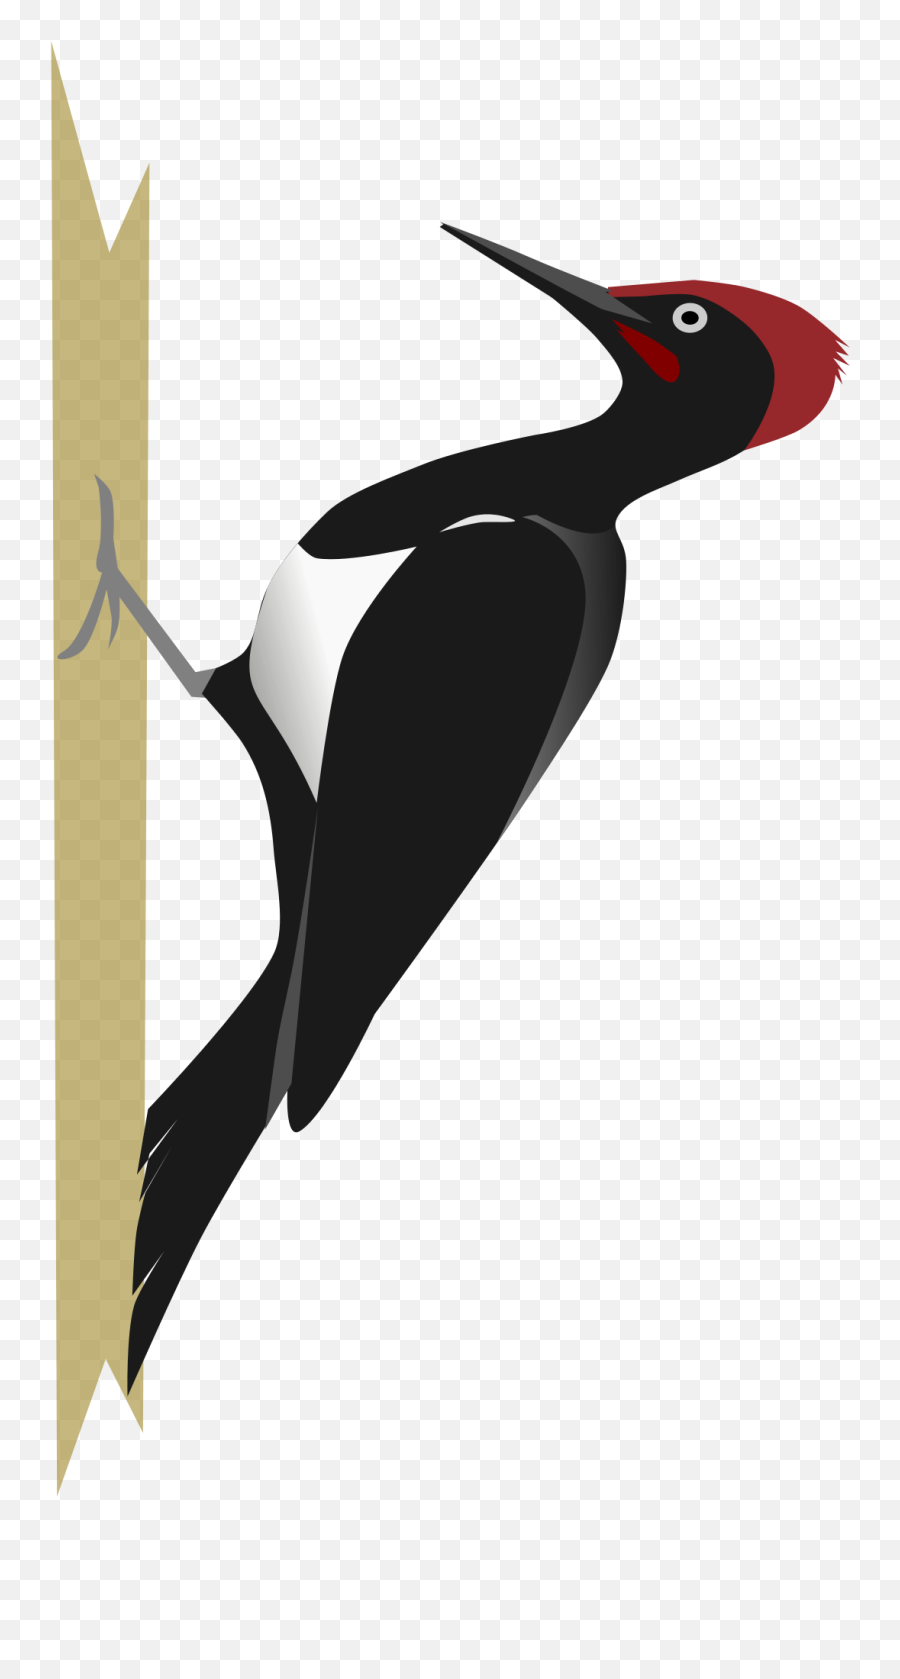 Woodpecker Png Images Free Download - Woodpecker Png,Woodpecker Png